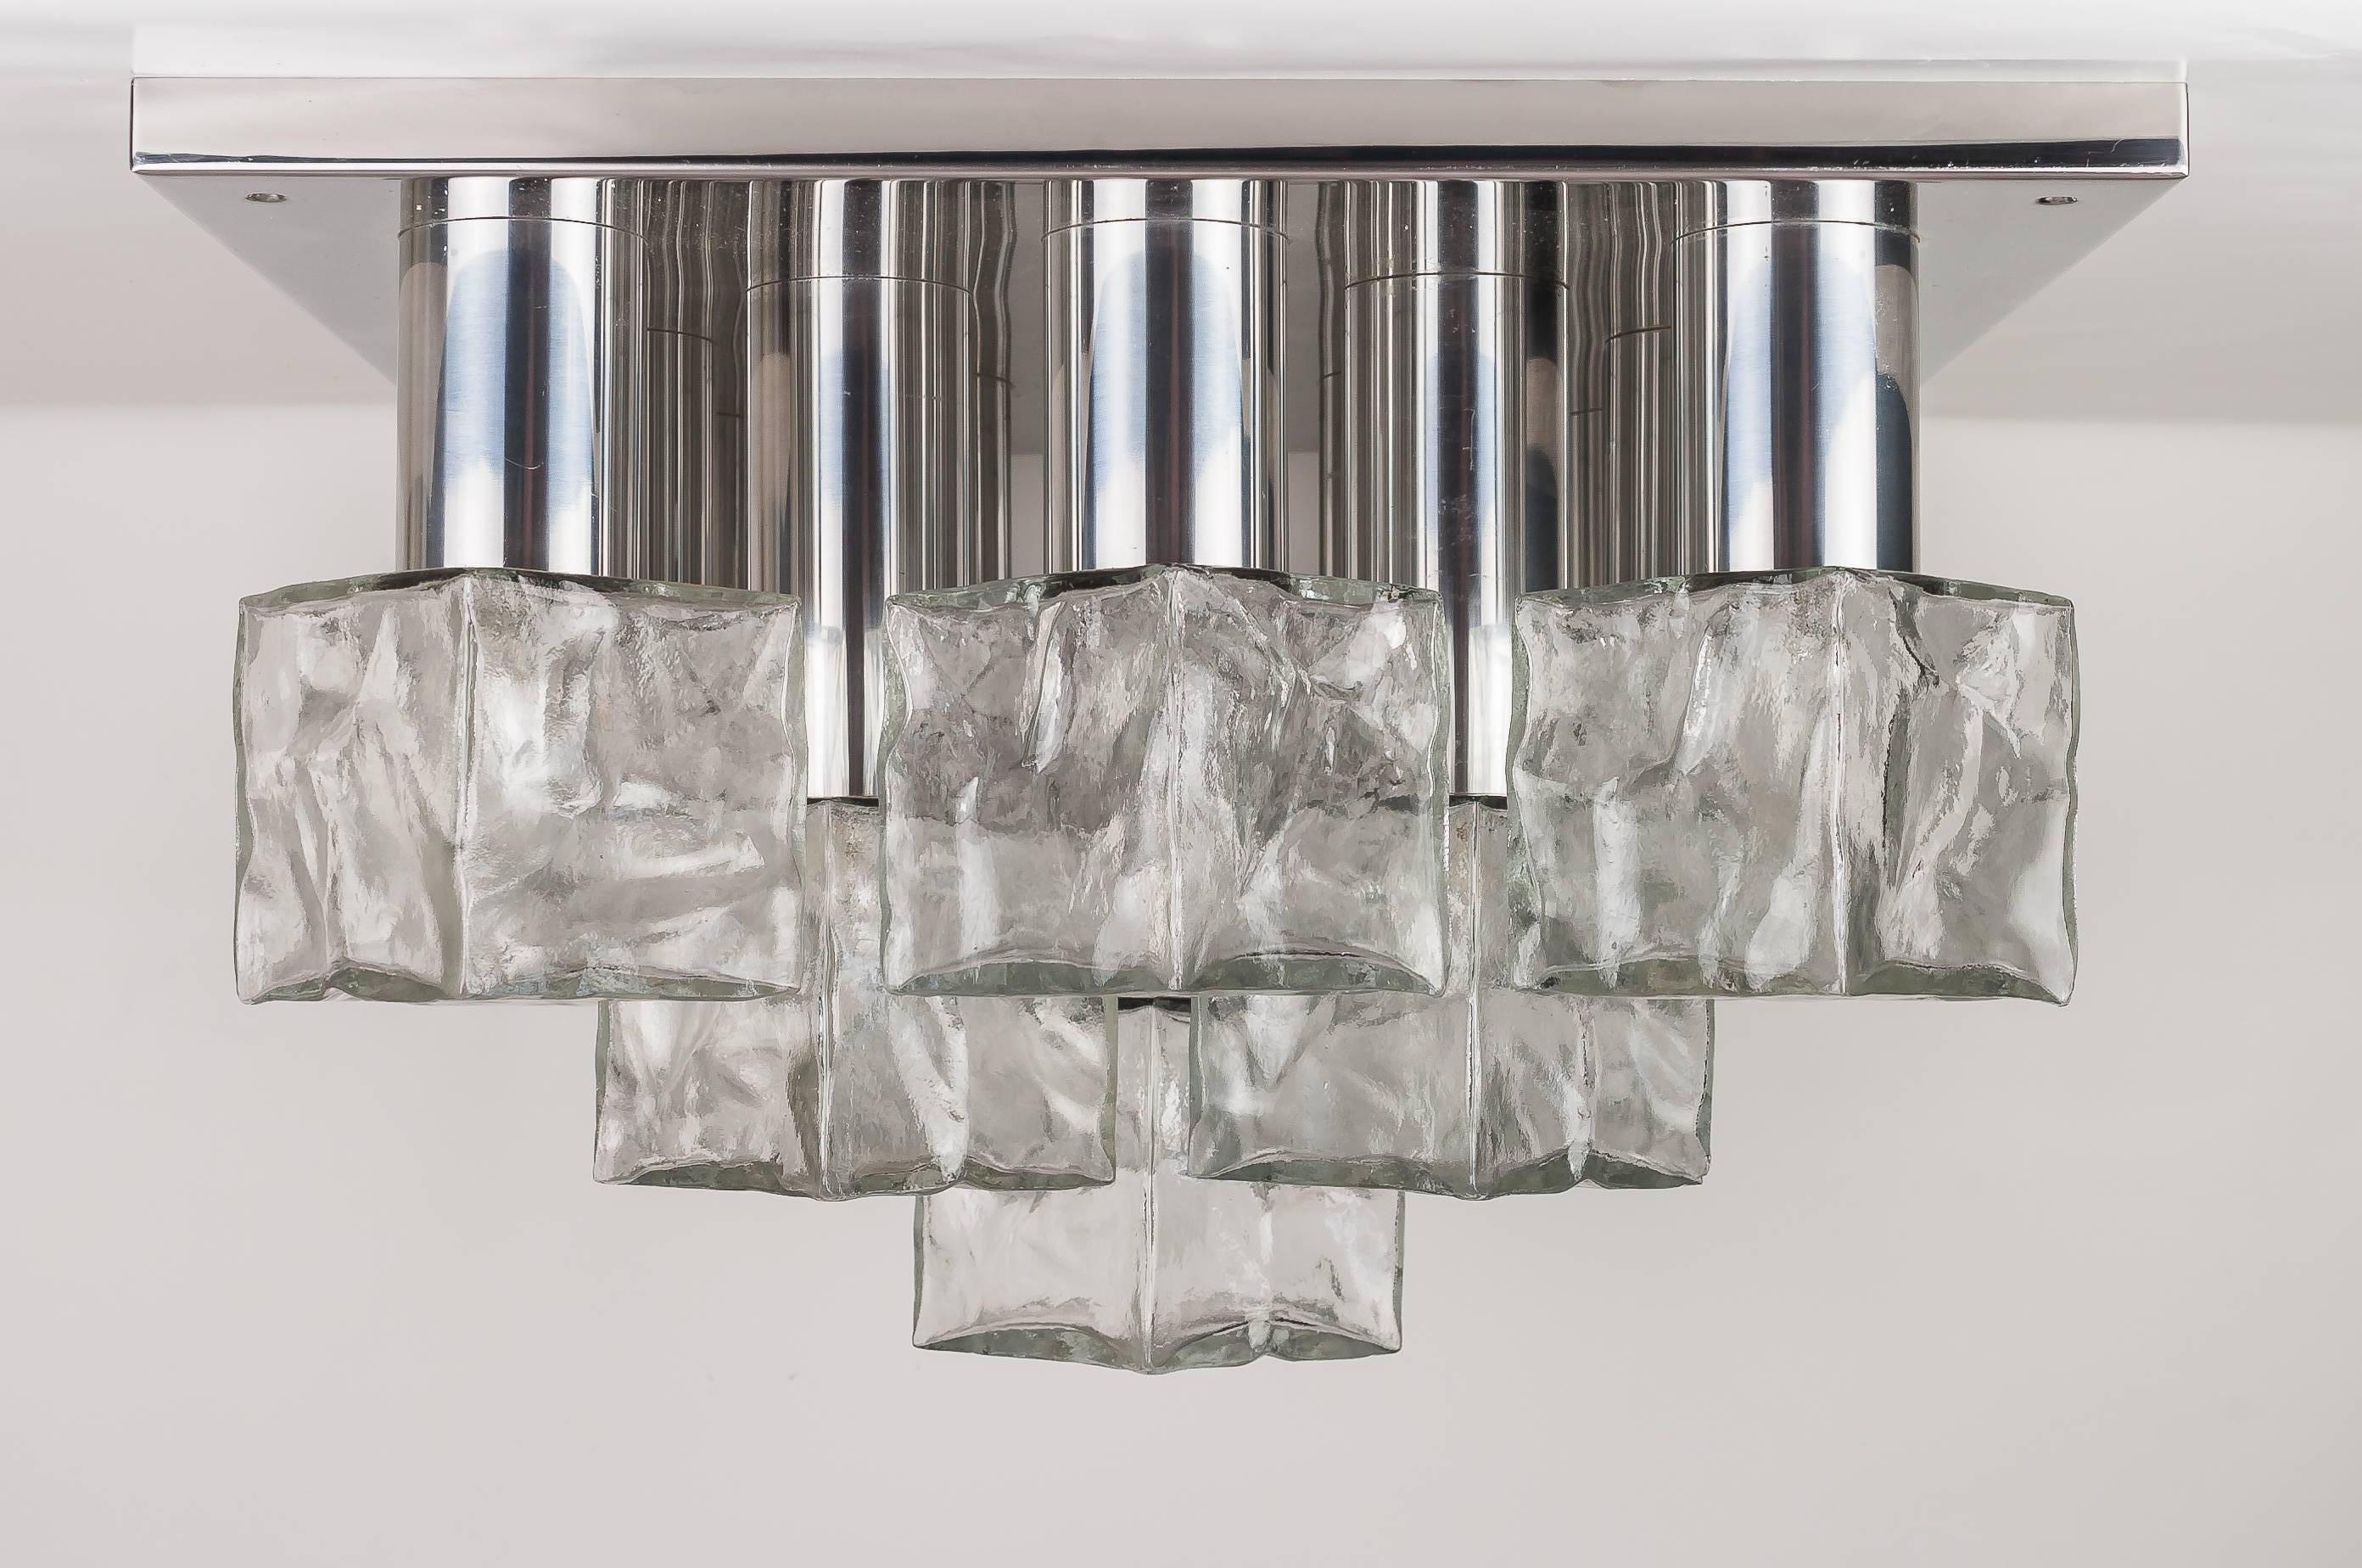 Kalmar Flush Mount Light or Sconce, Nickel plated, Cast Ice Glass, ca. 1970
There are 13 small base Edison bulbs up to 40W per bulb which are covered with textured ice glass cubes.
The lamp can be used as wall or flush mount light.
Original